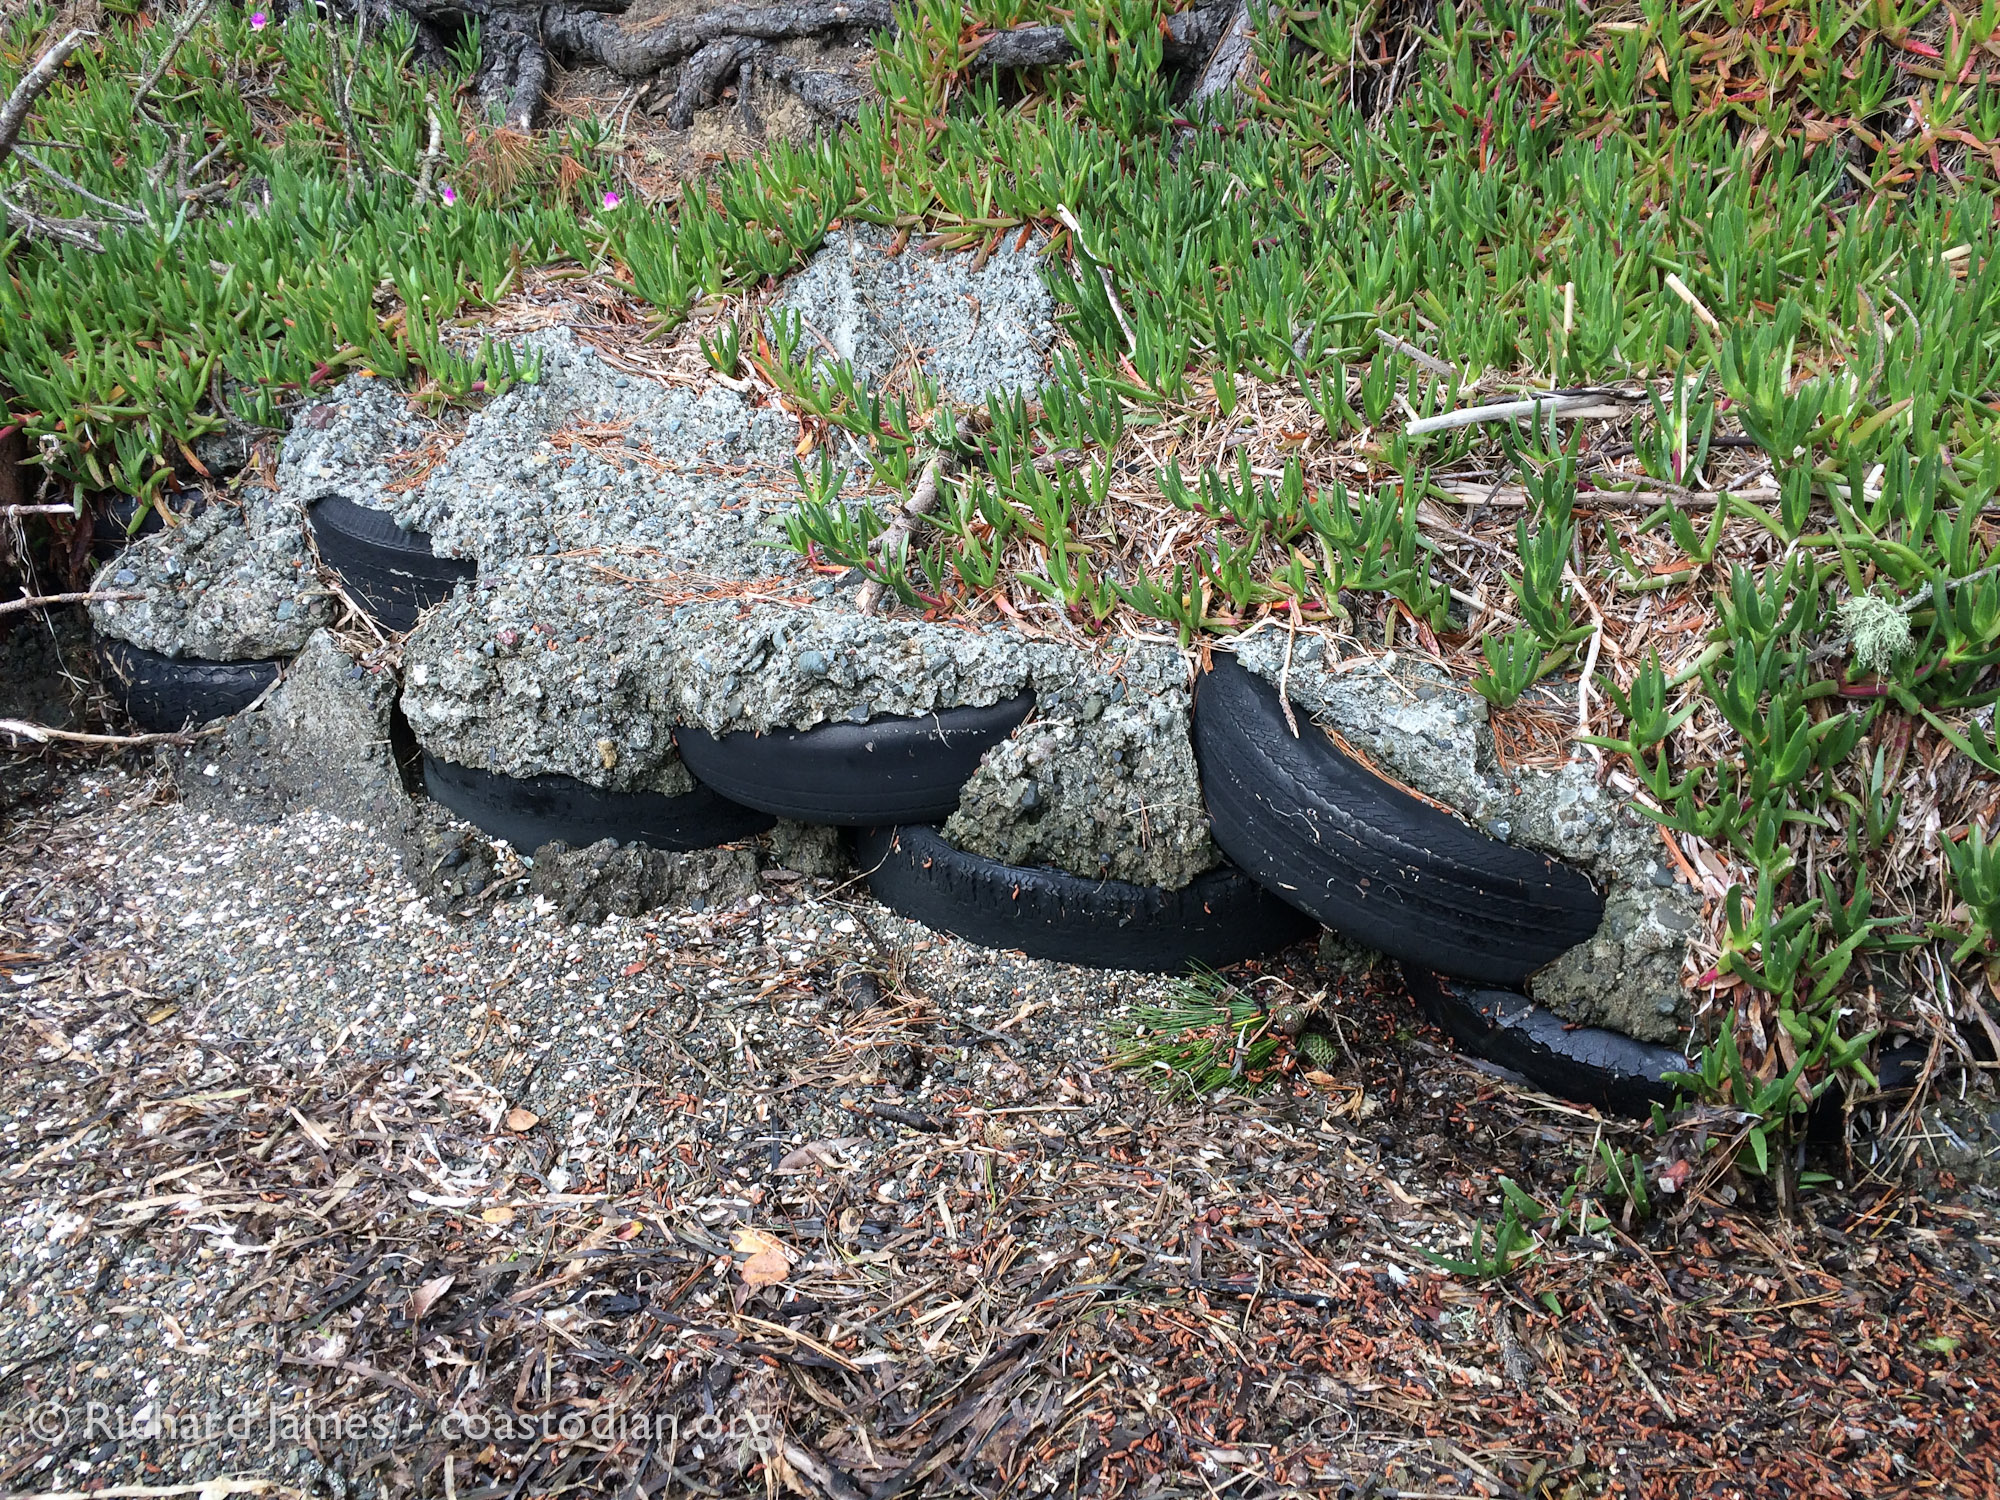 tires littering Tomales Bay at Marconi Cove.